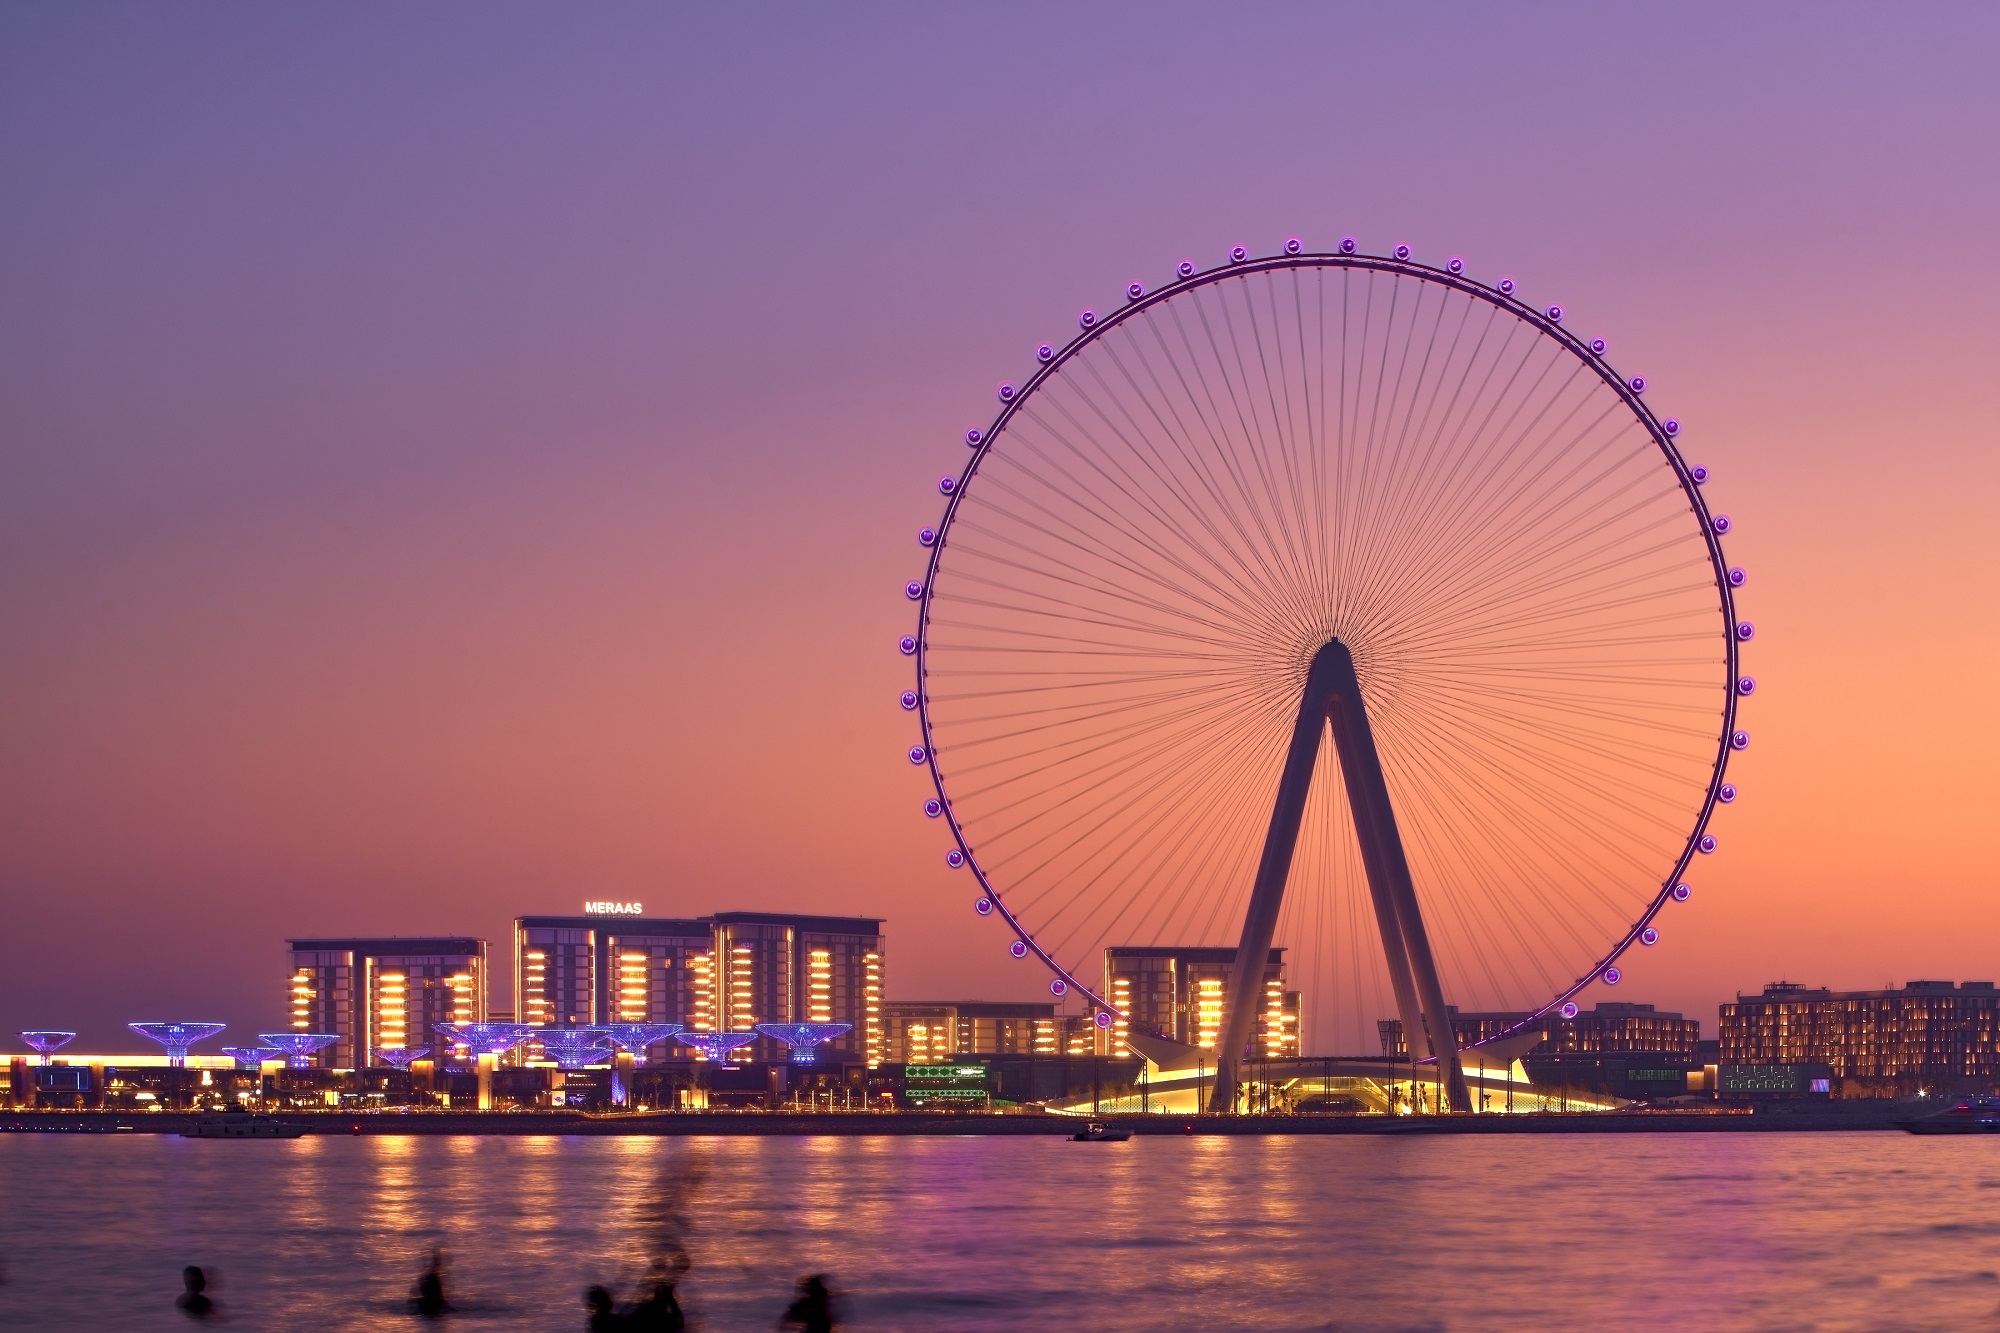 Building the world’s tallest observation wheel